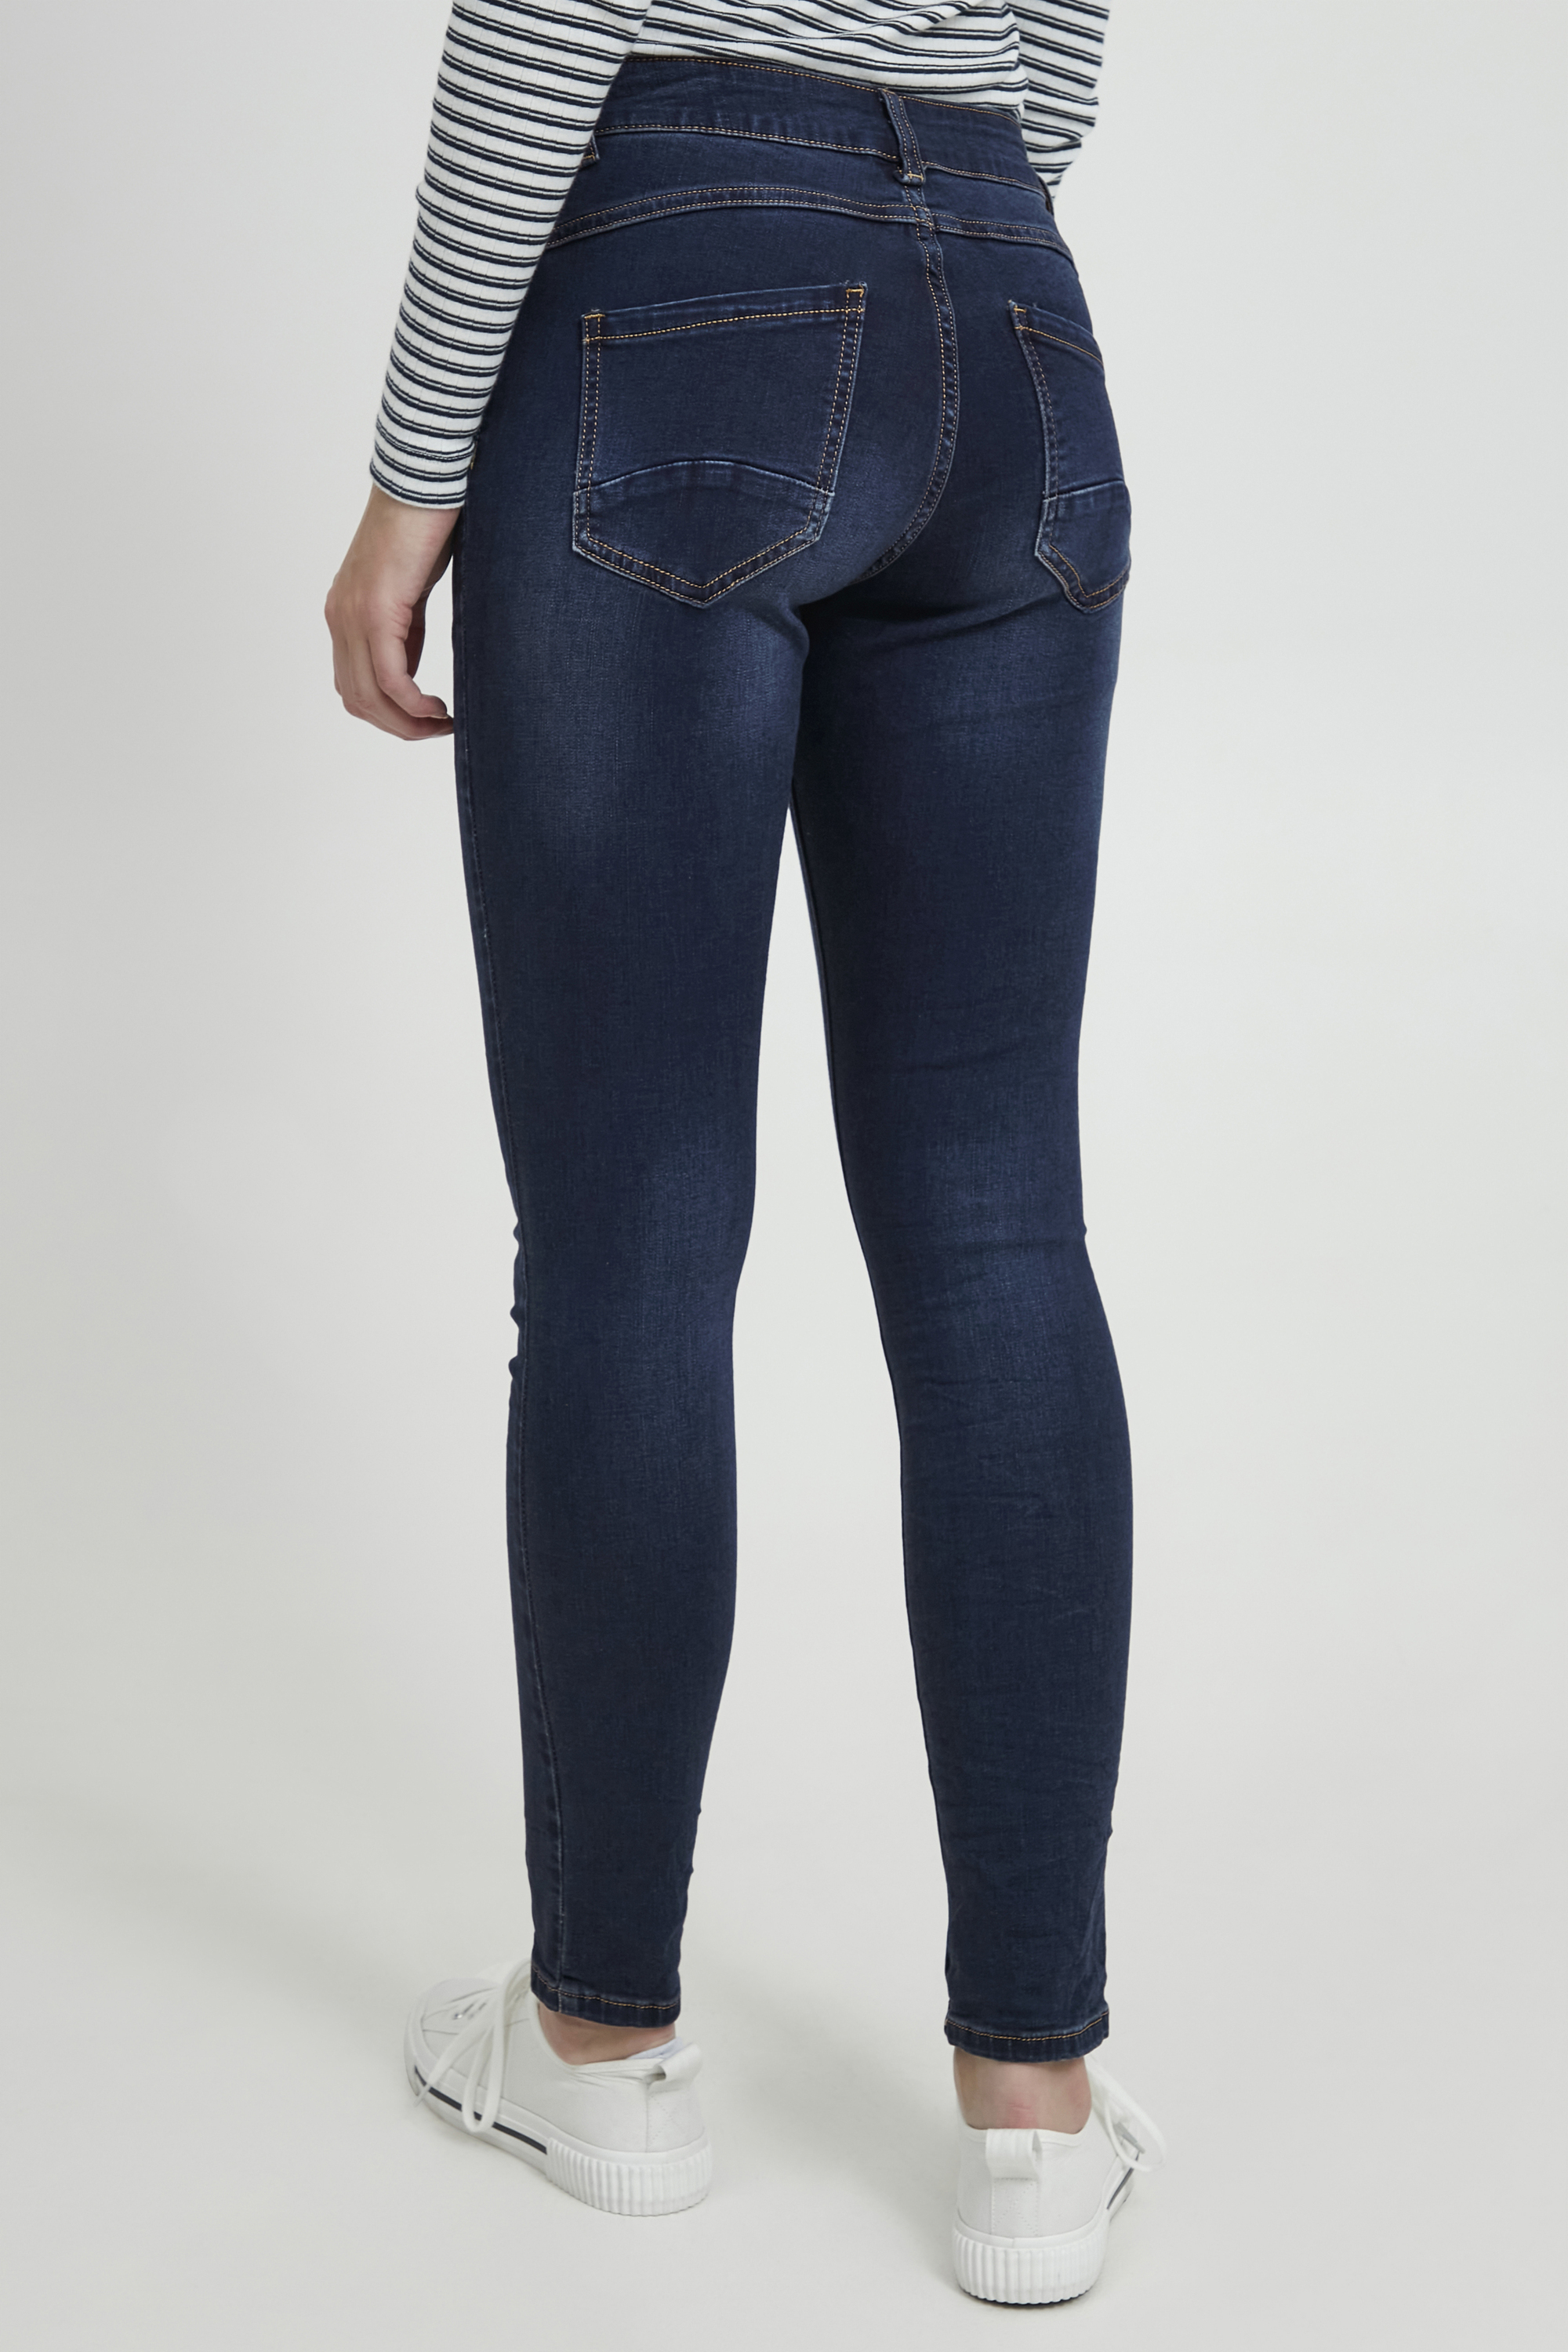 b.young Jeans BXKAILY in Dunkelblau 